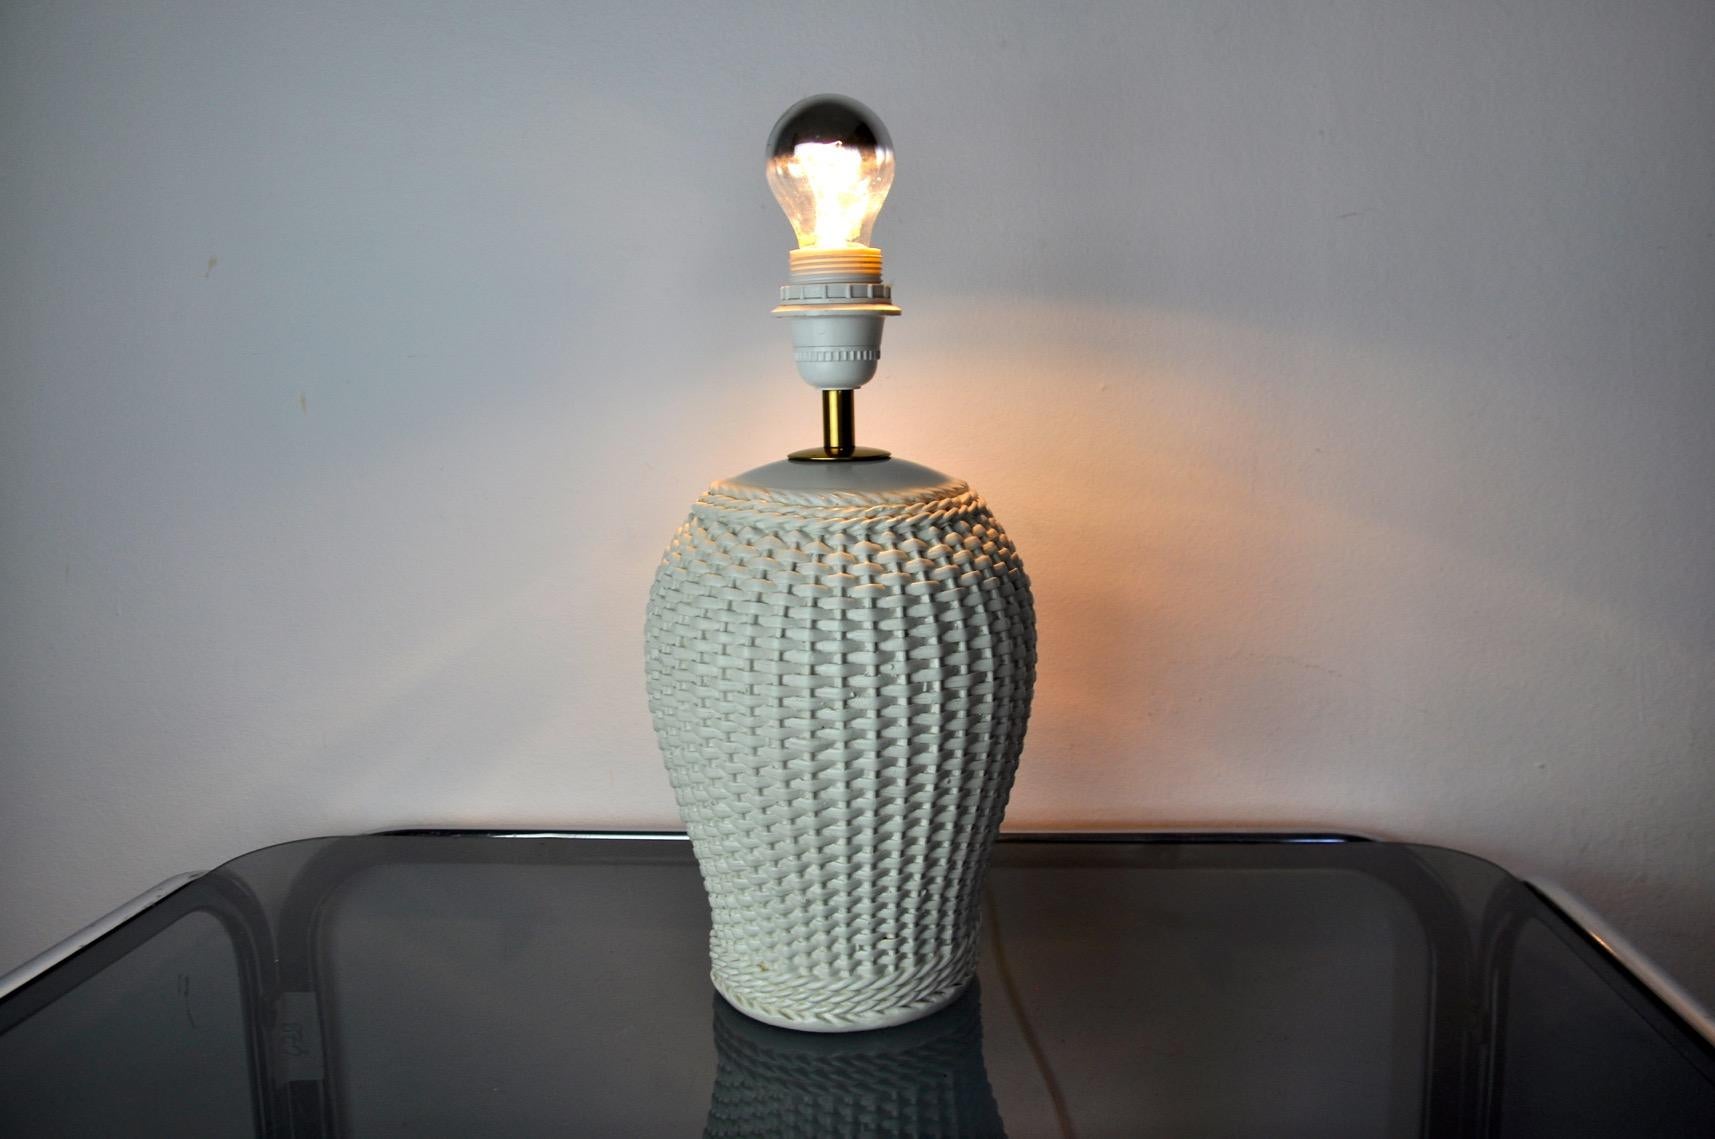 Superb and rare rattan or bamboo ceramic effect lamp, designated and produced in Italy in the 1970s.
White ceramic and gold metal base, the lamp can perfectly accommodate a lampshade.
Unique object that will illuminate perfectly and bring a real